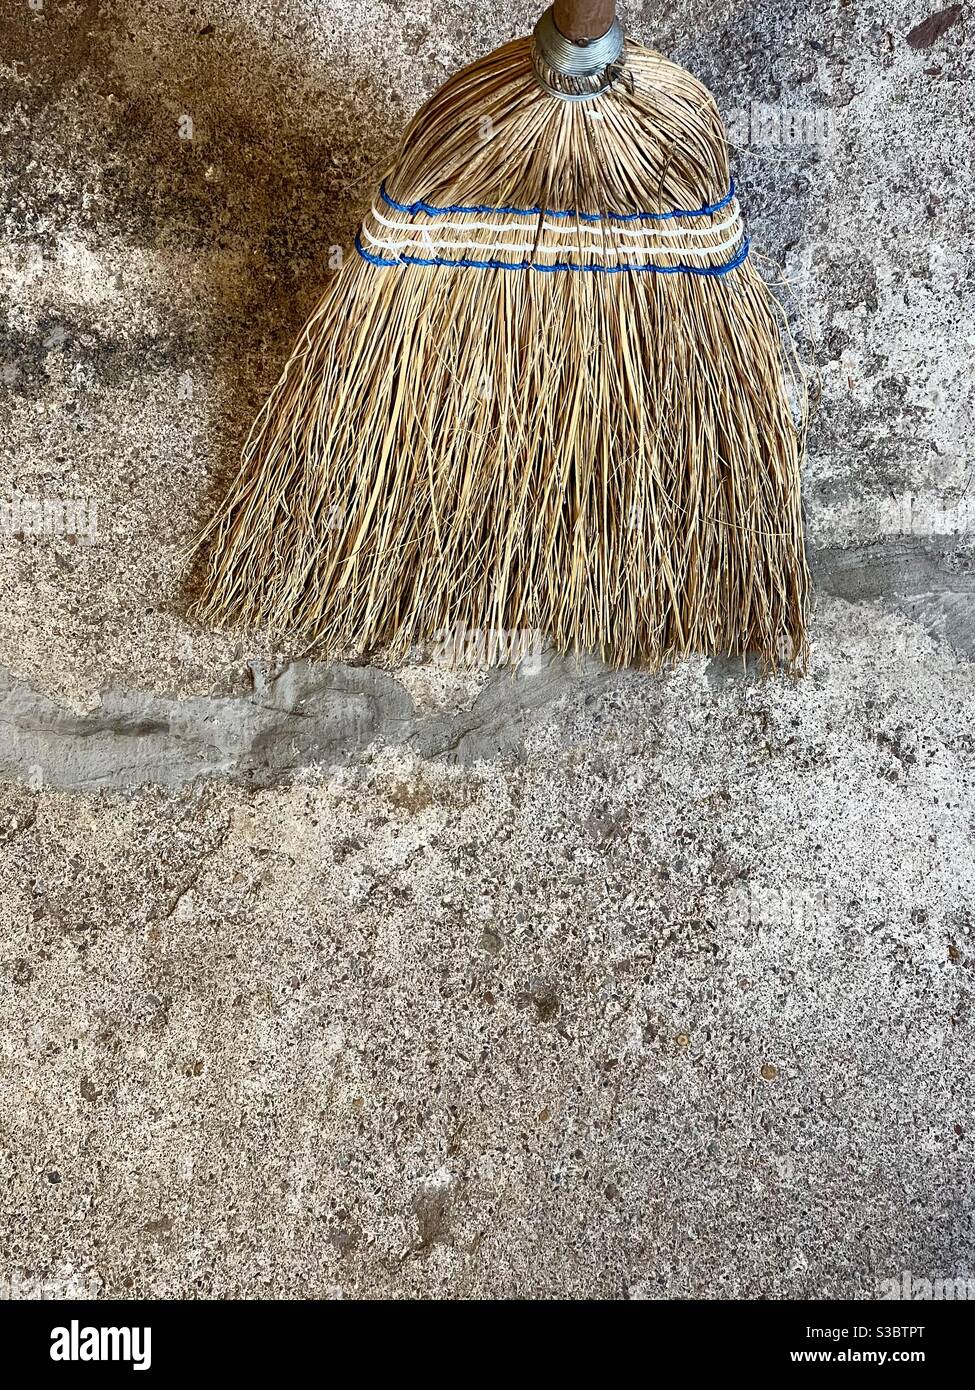 Straw broom on a clean concrete floor. Stock Photo